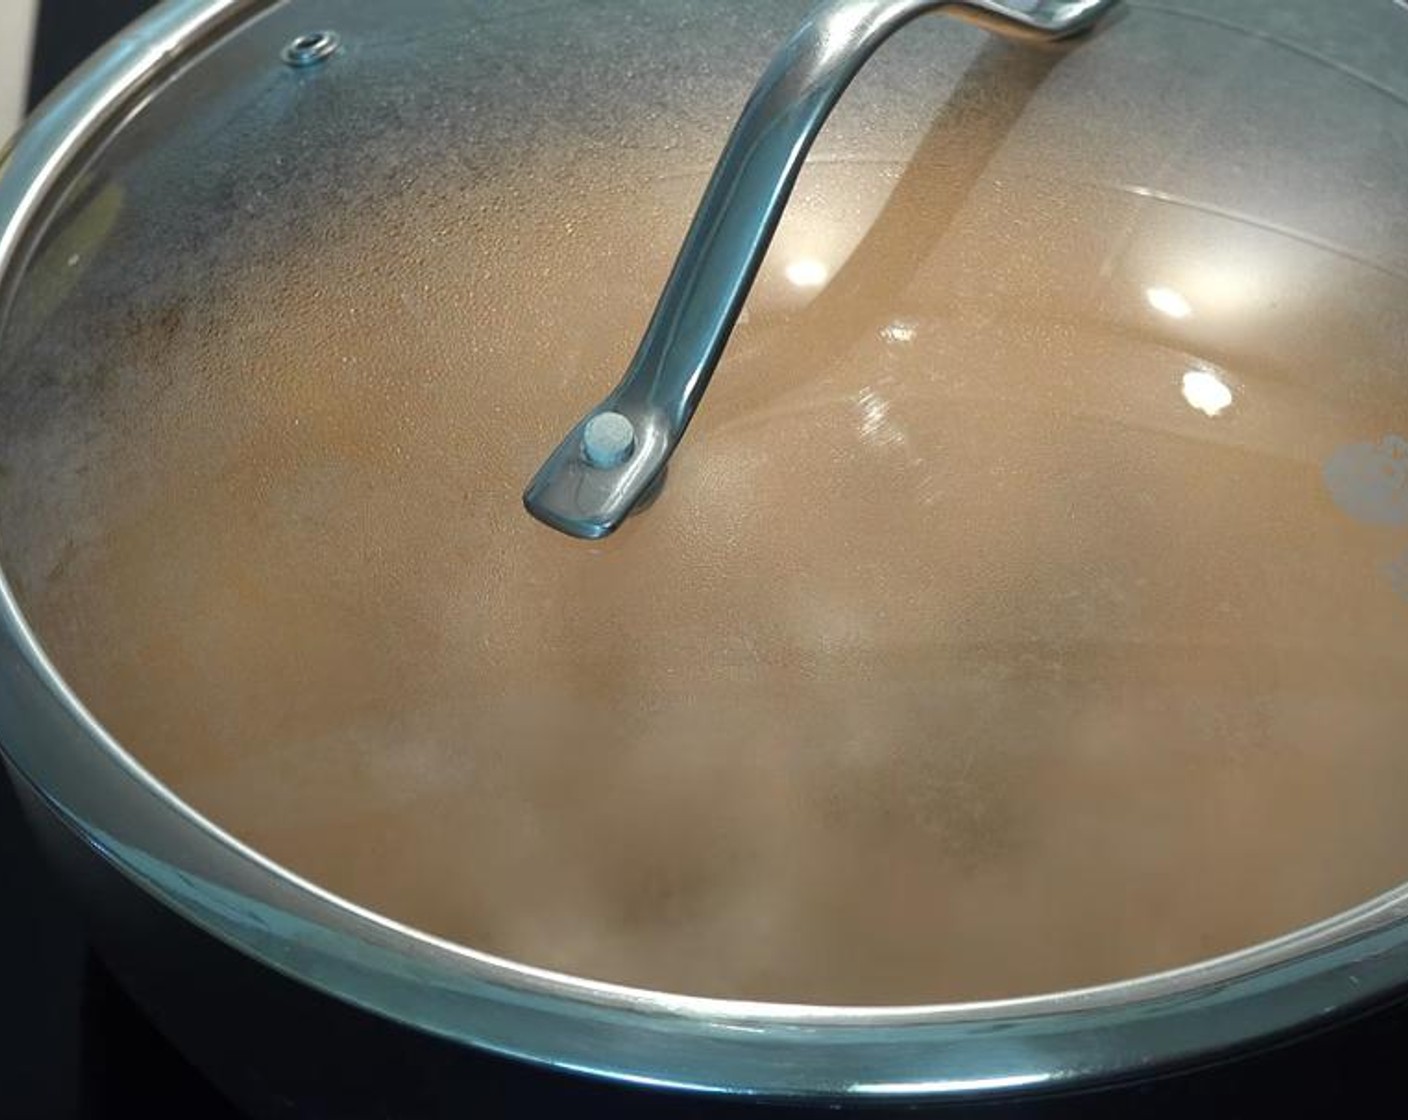 step 6 Once boiling, reduce heat to lowest setting. Place top on the pot and allow to simmer for 45 minutes.